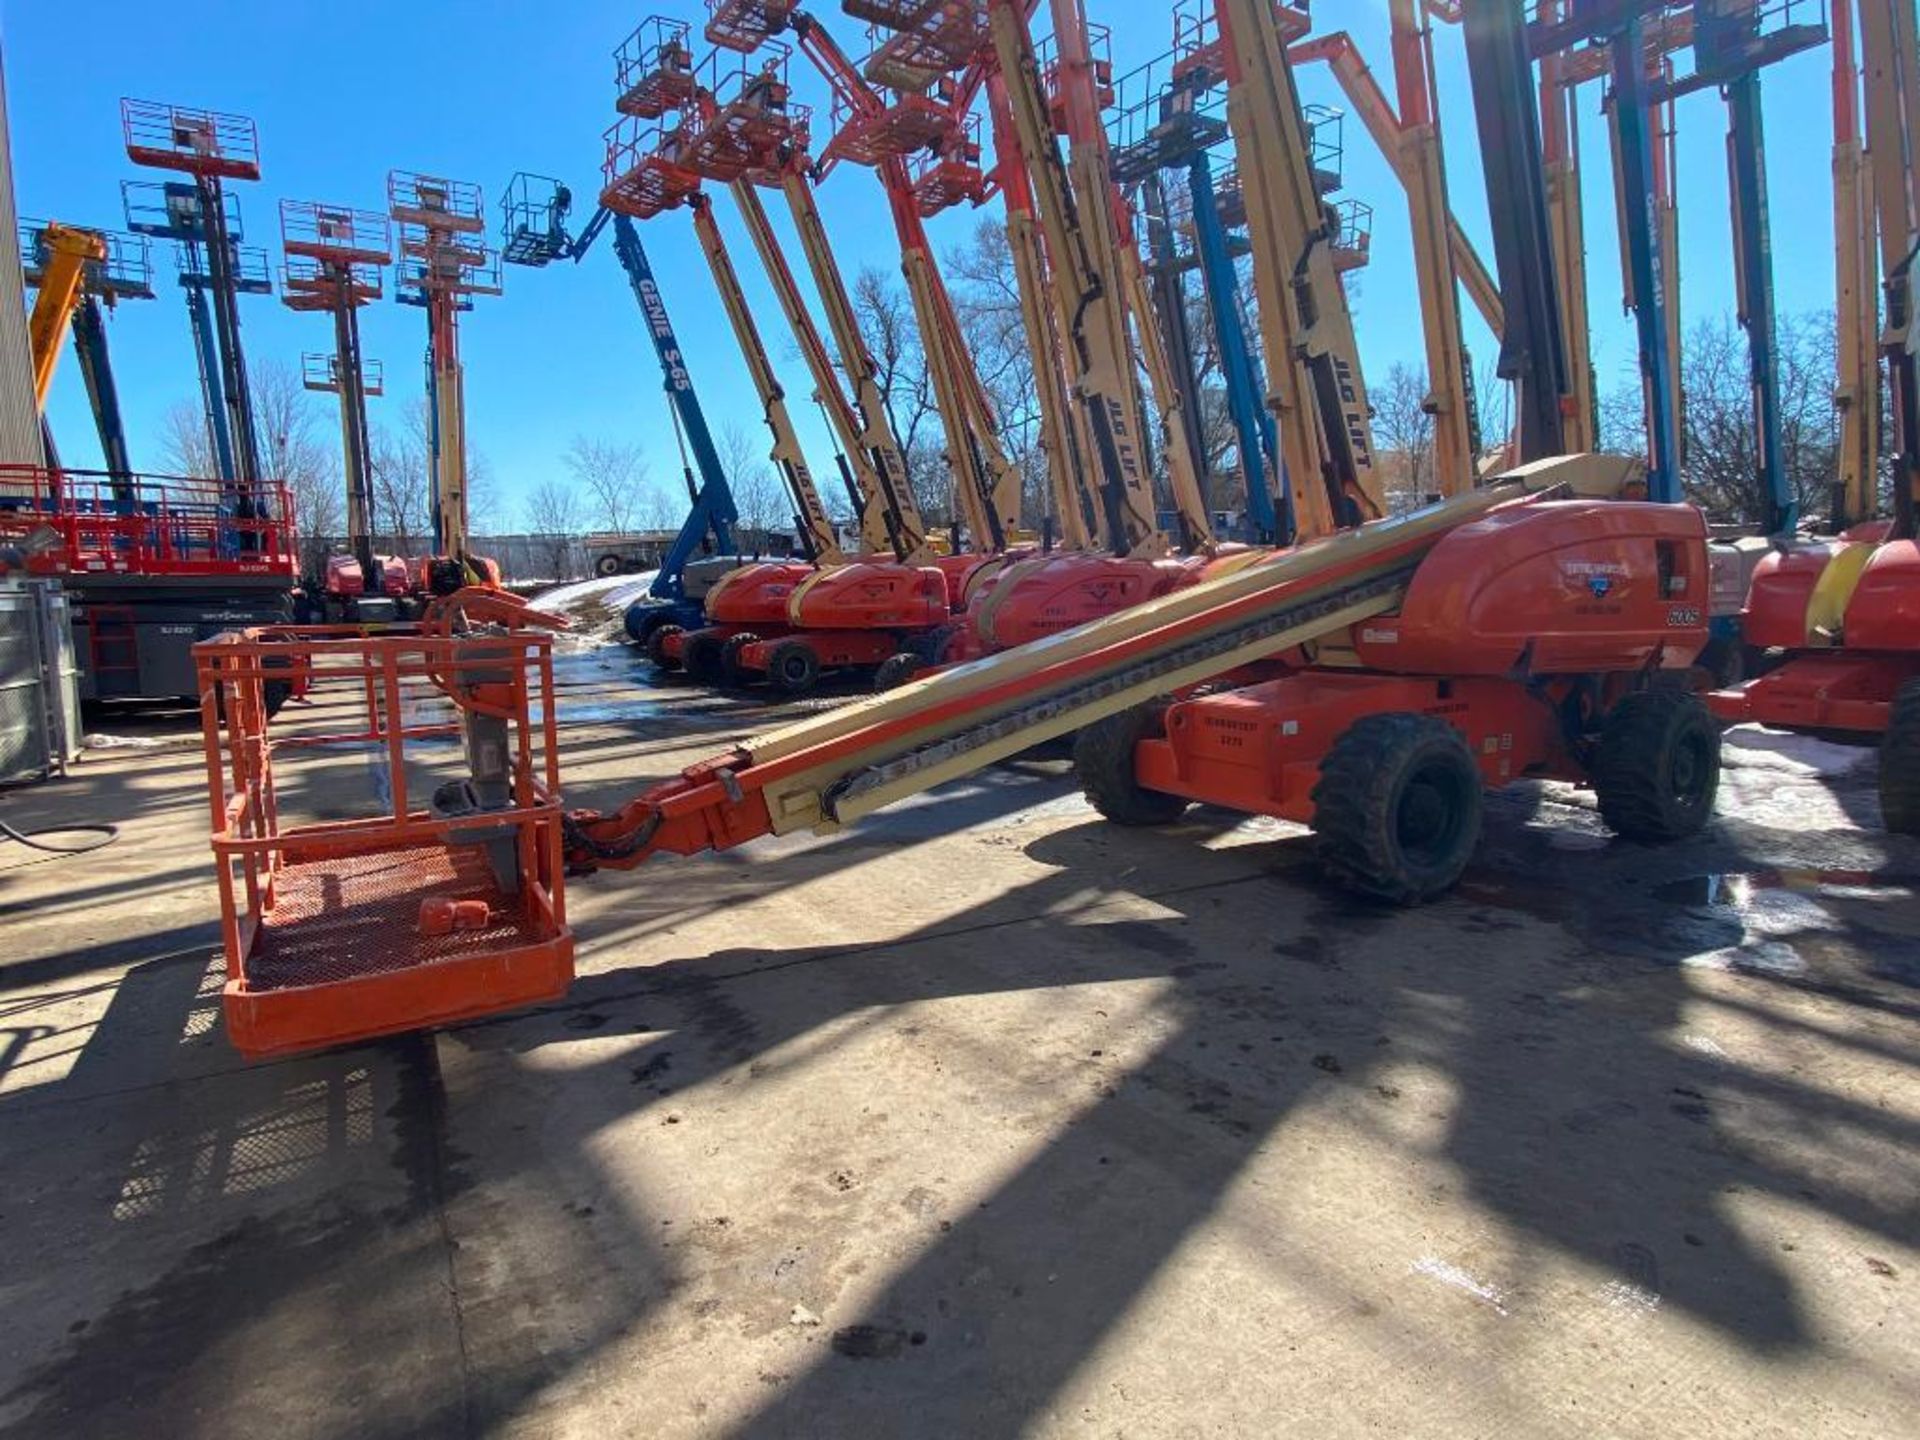 JLG 600S Rough Terrain Boom Lift (S/N 300061970, Year 2001), with 60' Platform Height, 49.47'